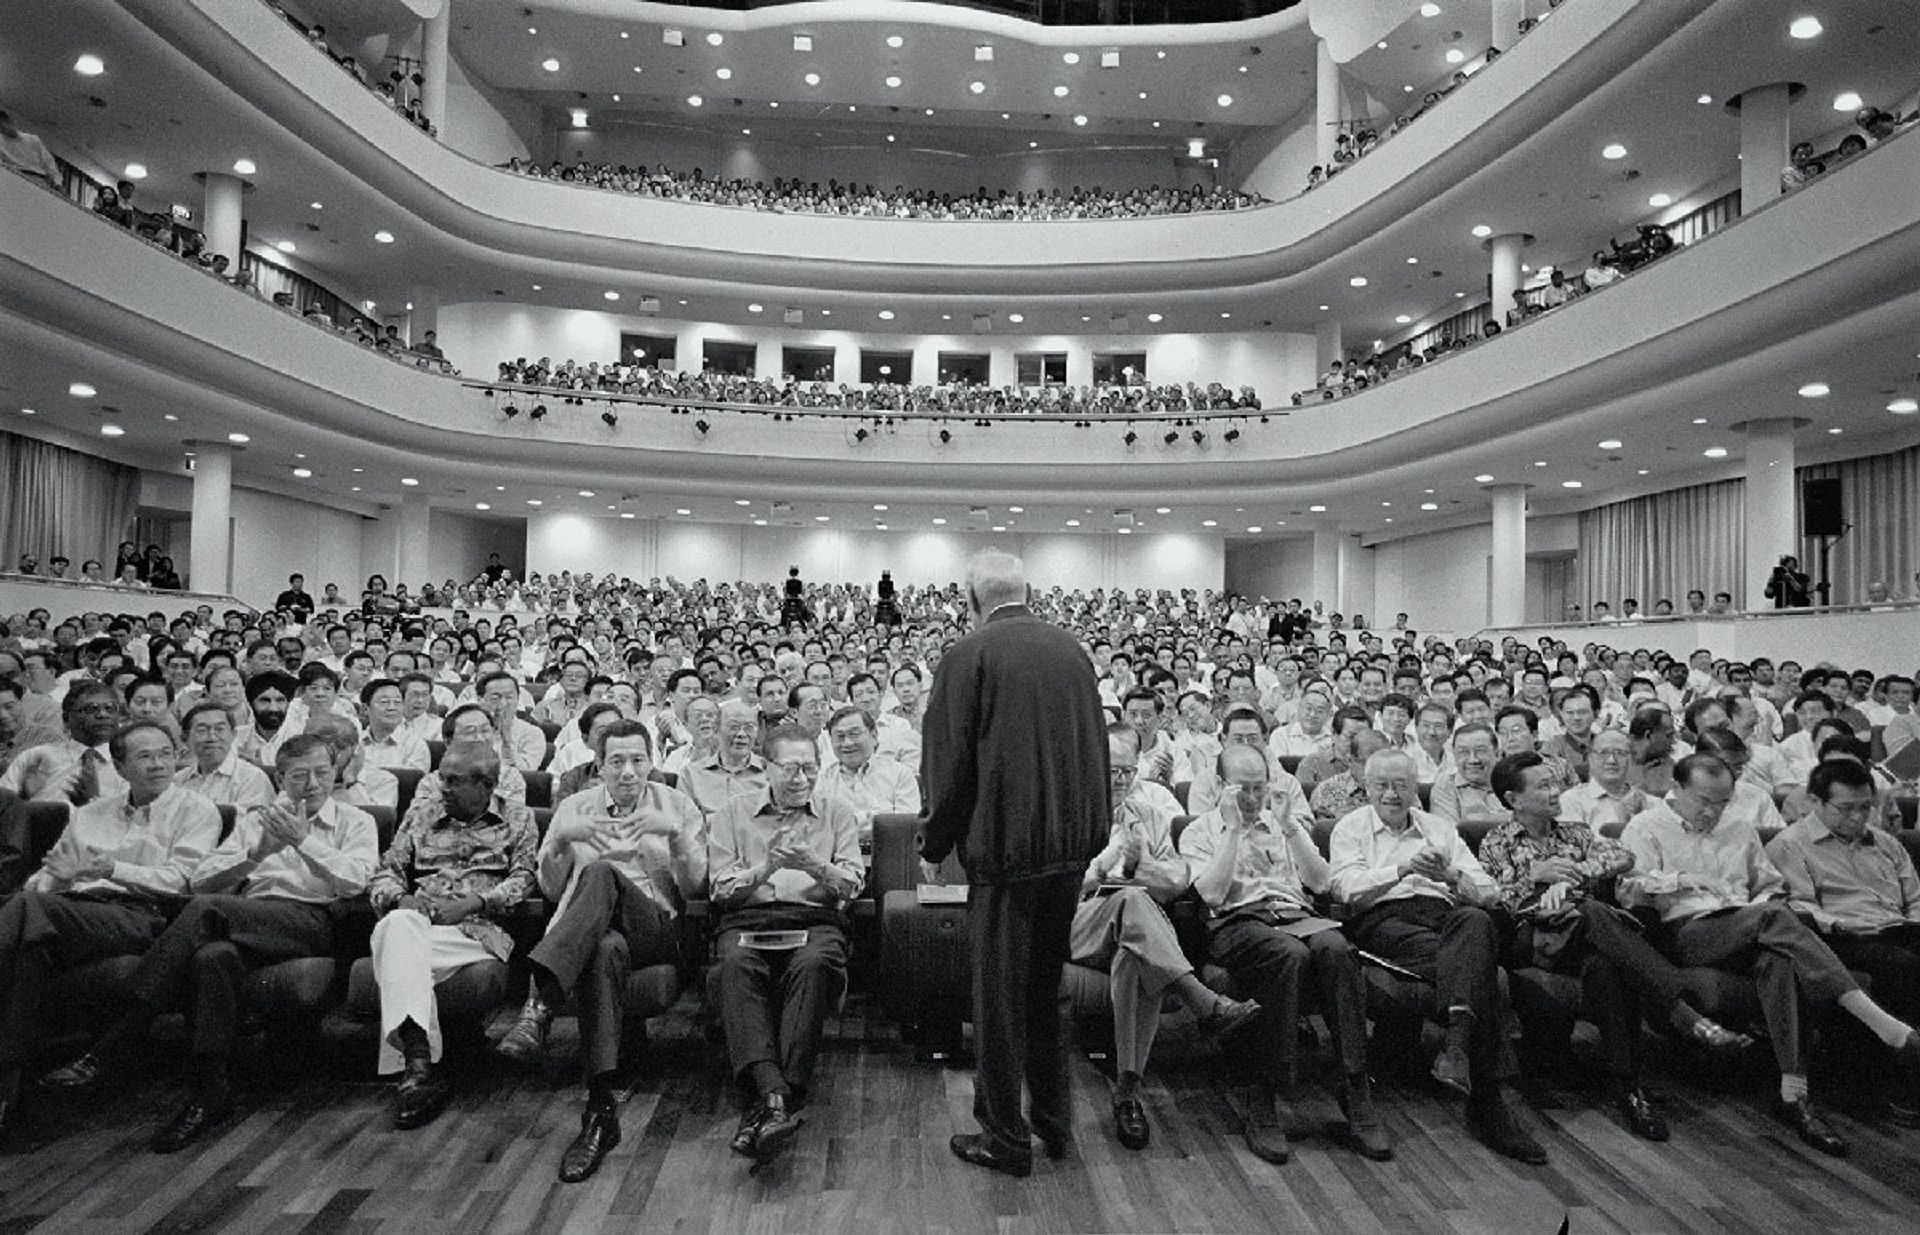 Greeting the 1,500-strong crowd at the National University of Singapore’s University Cultural Centre before the annual National Day Rally speech was delivered by Prime Minister Goh Chok Tong on Aug 19, 2001. ST Photo: George Gascon